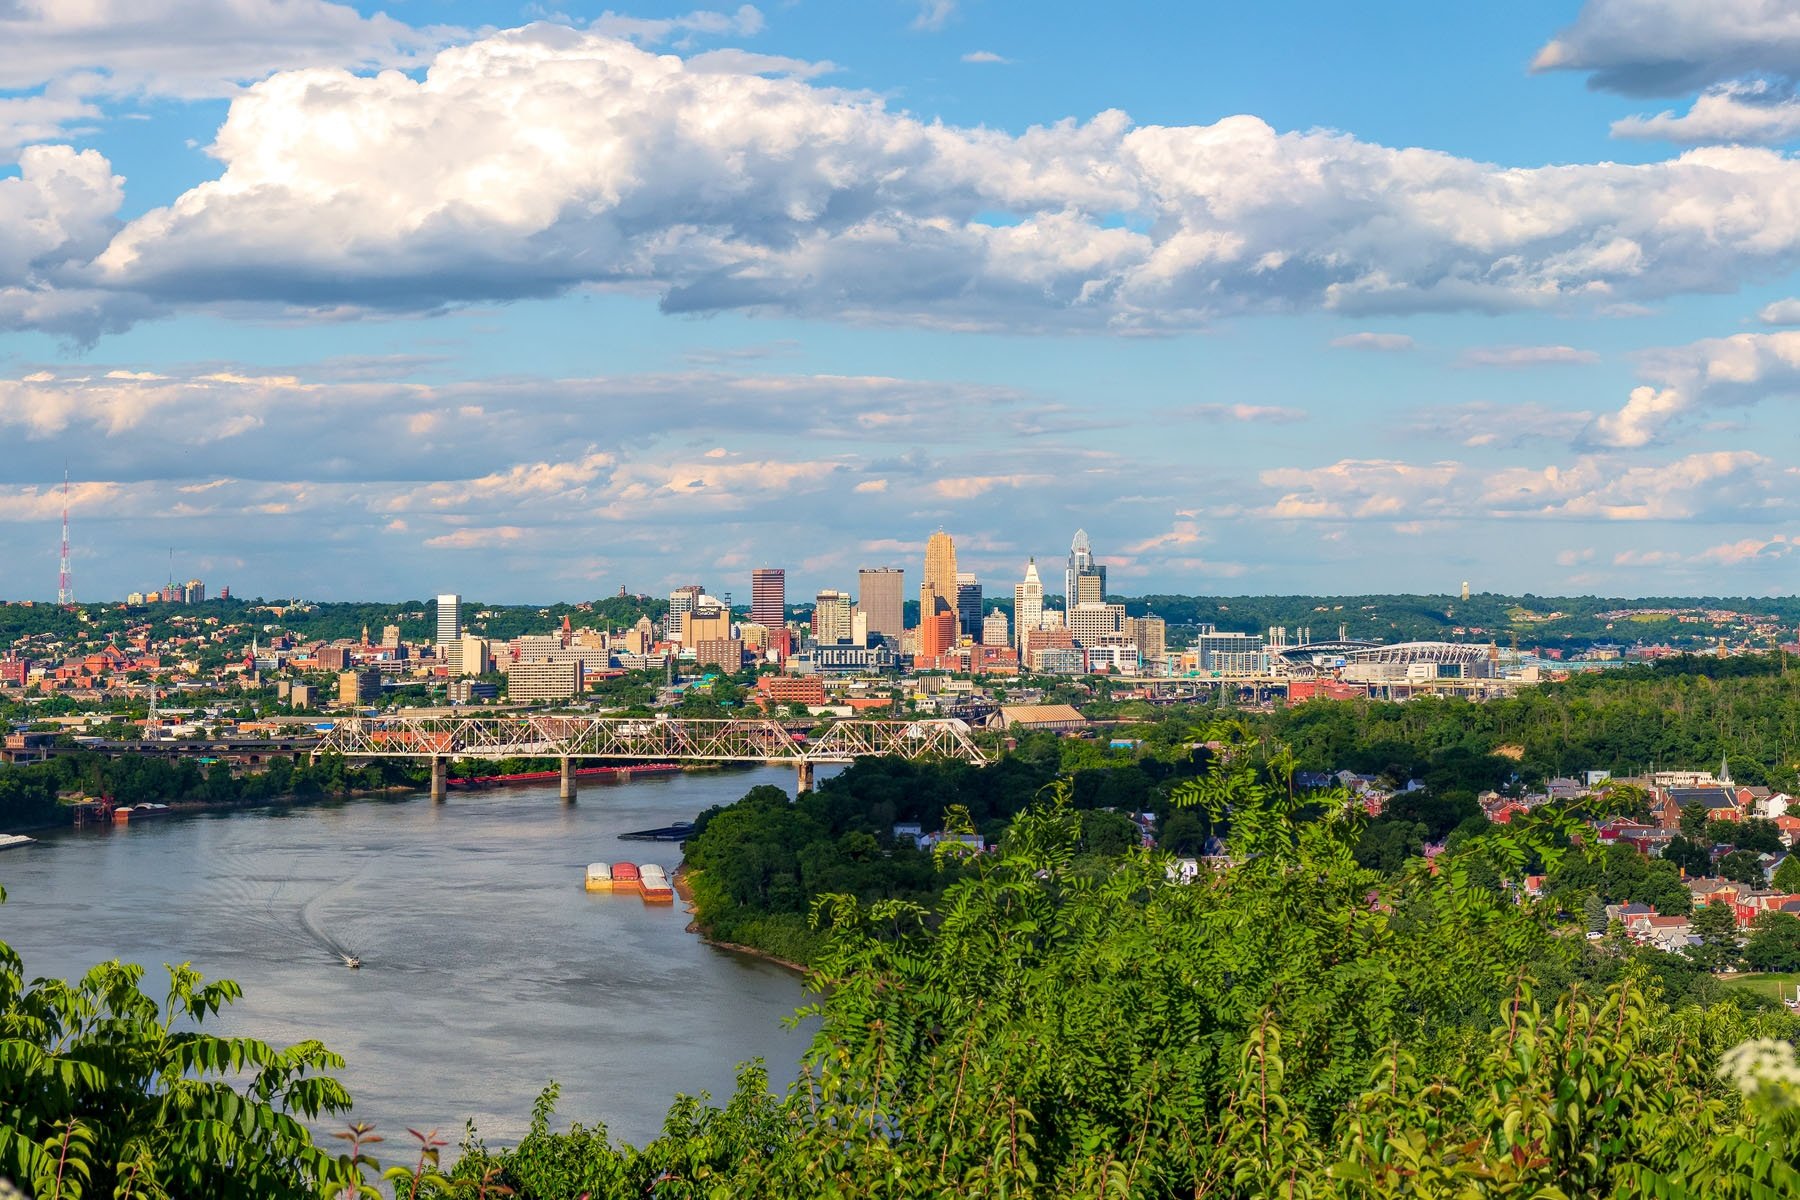 VIEWING THE "QUEEN" FROM THE WEST - Most Cincinnatians are familiar with this view of the city. If you haven’t visited Mount Echo Park in Price Hill, be sure to put it on your to do list. This is a grand view of the Queen City.